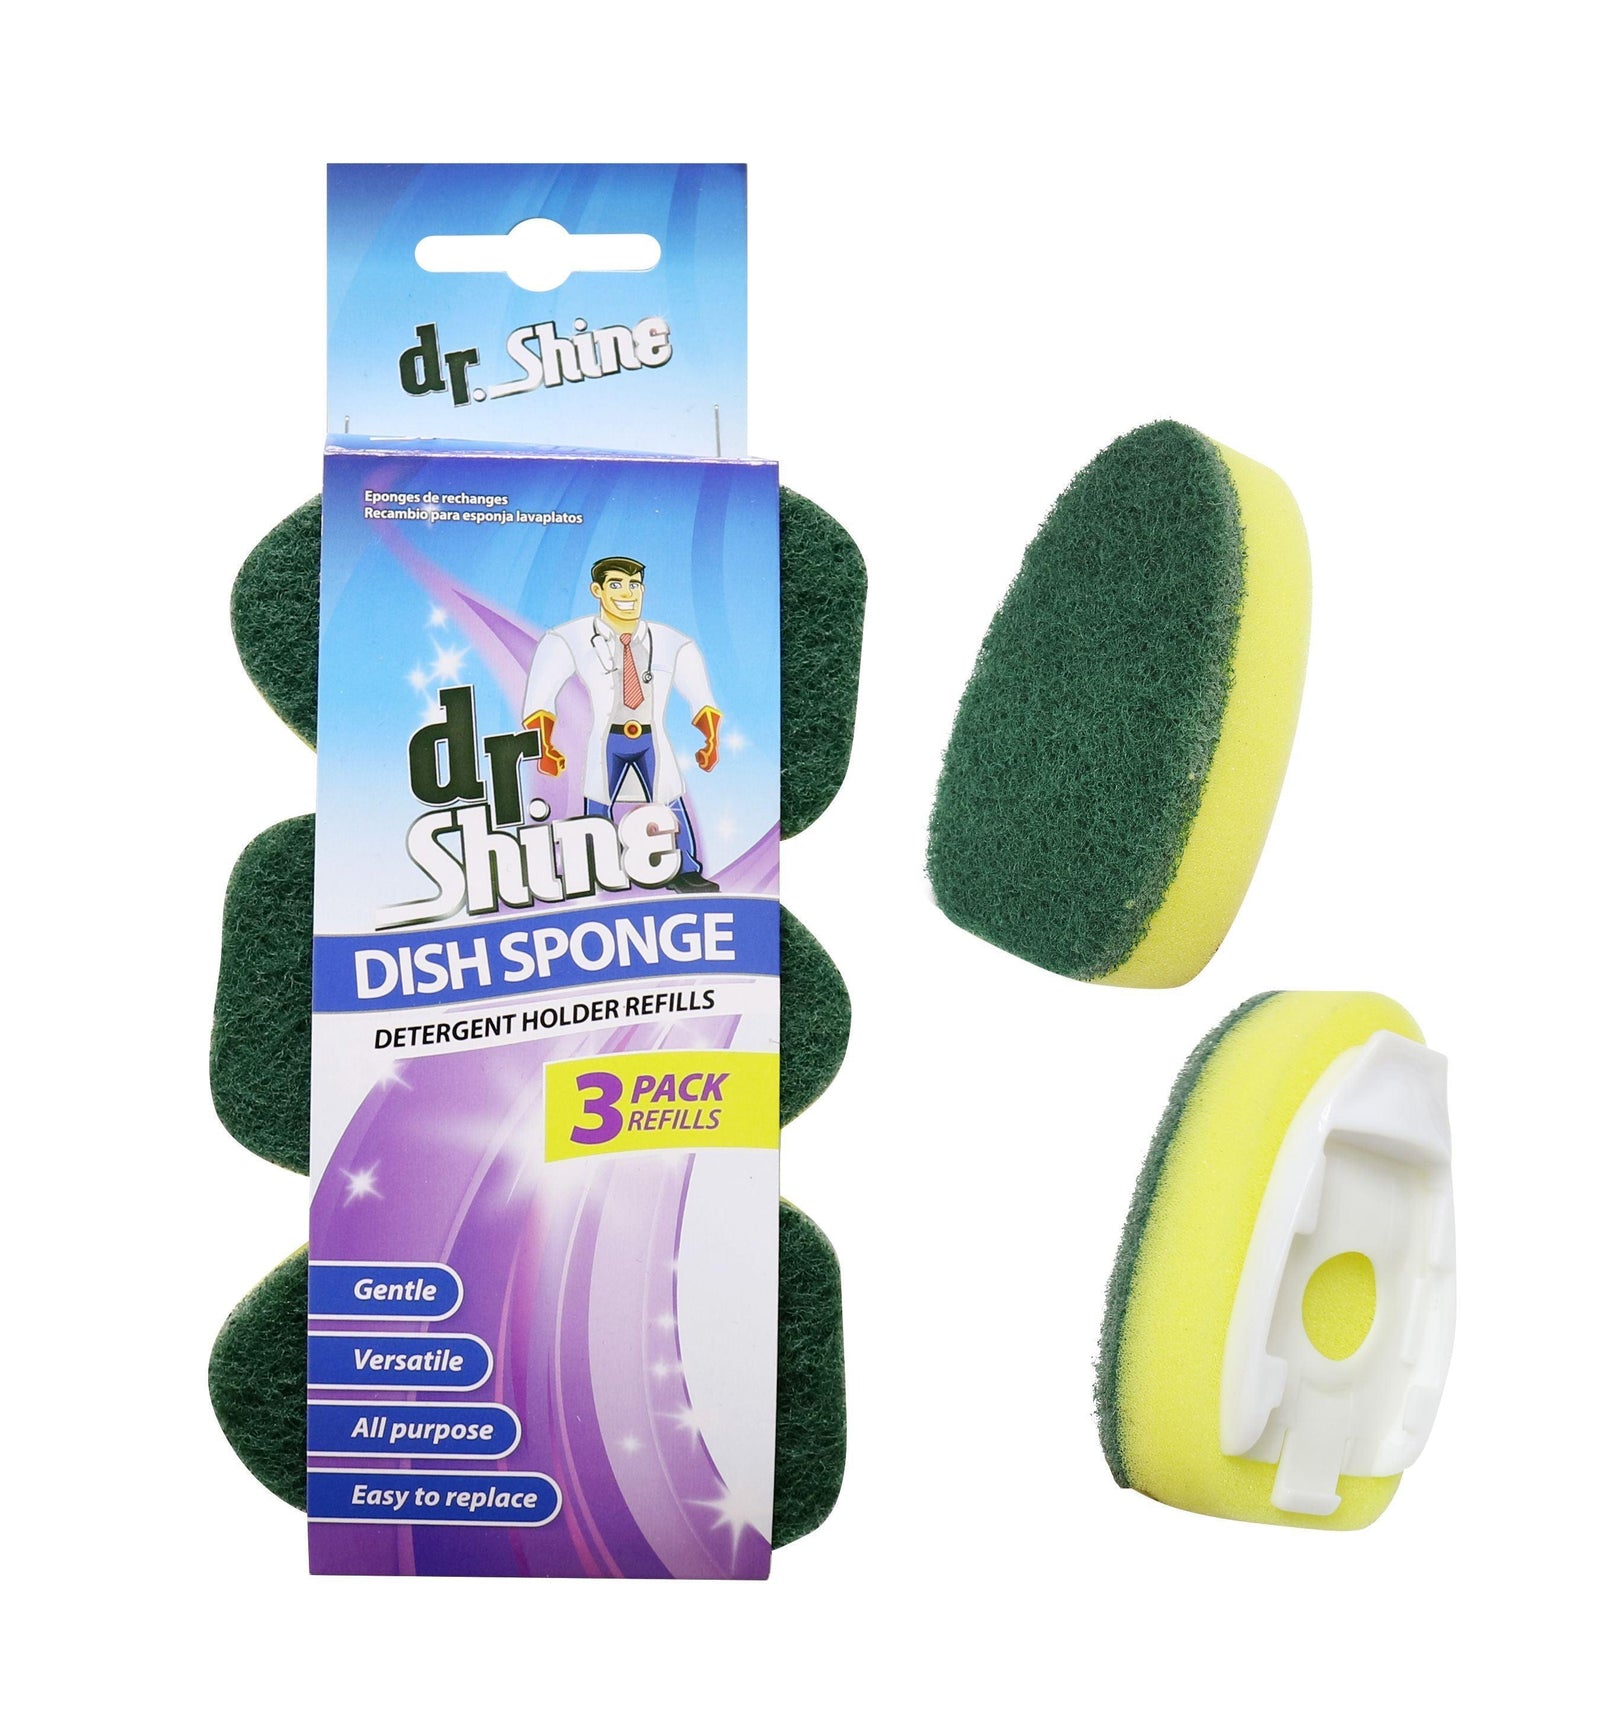 Spontex Dish Sponge Pack of 2 Cleaning and Suction in One Wash